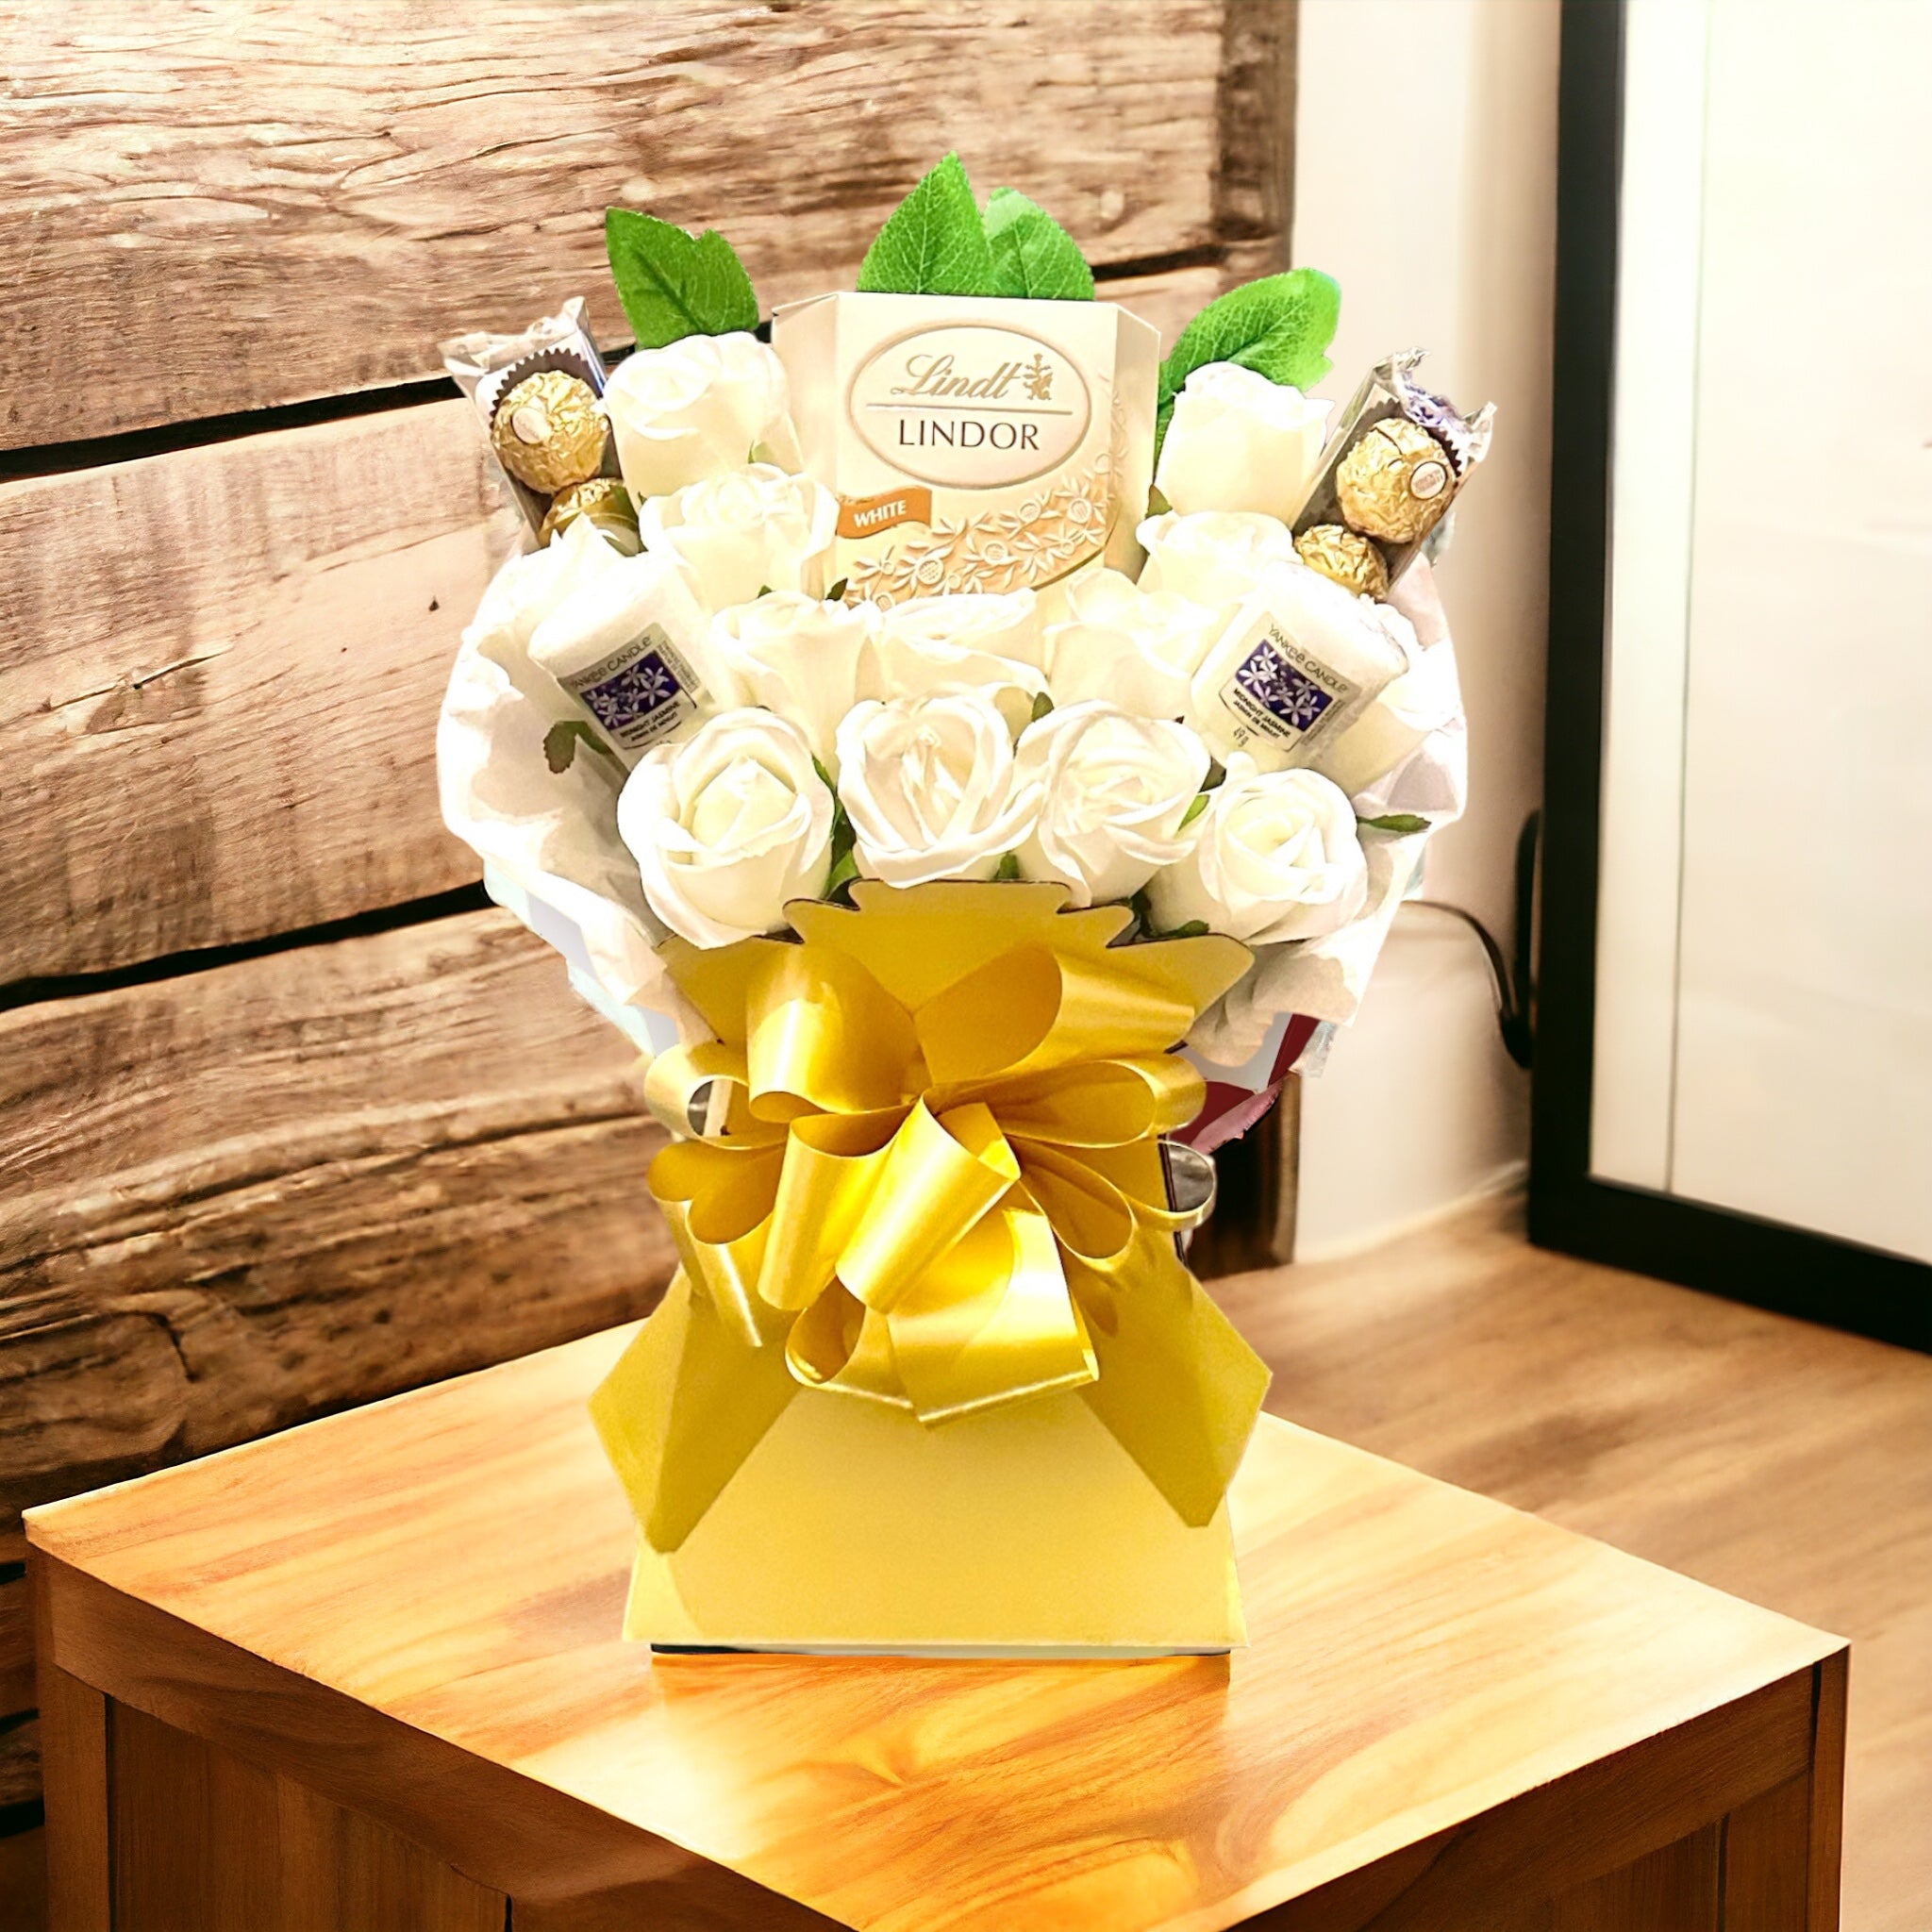 Lindor Chocolate & Candle Bouquet